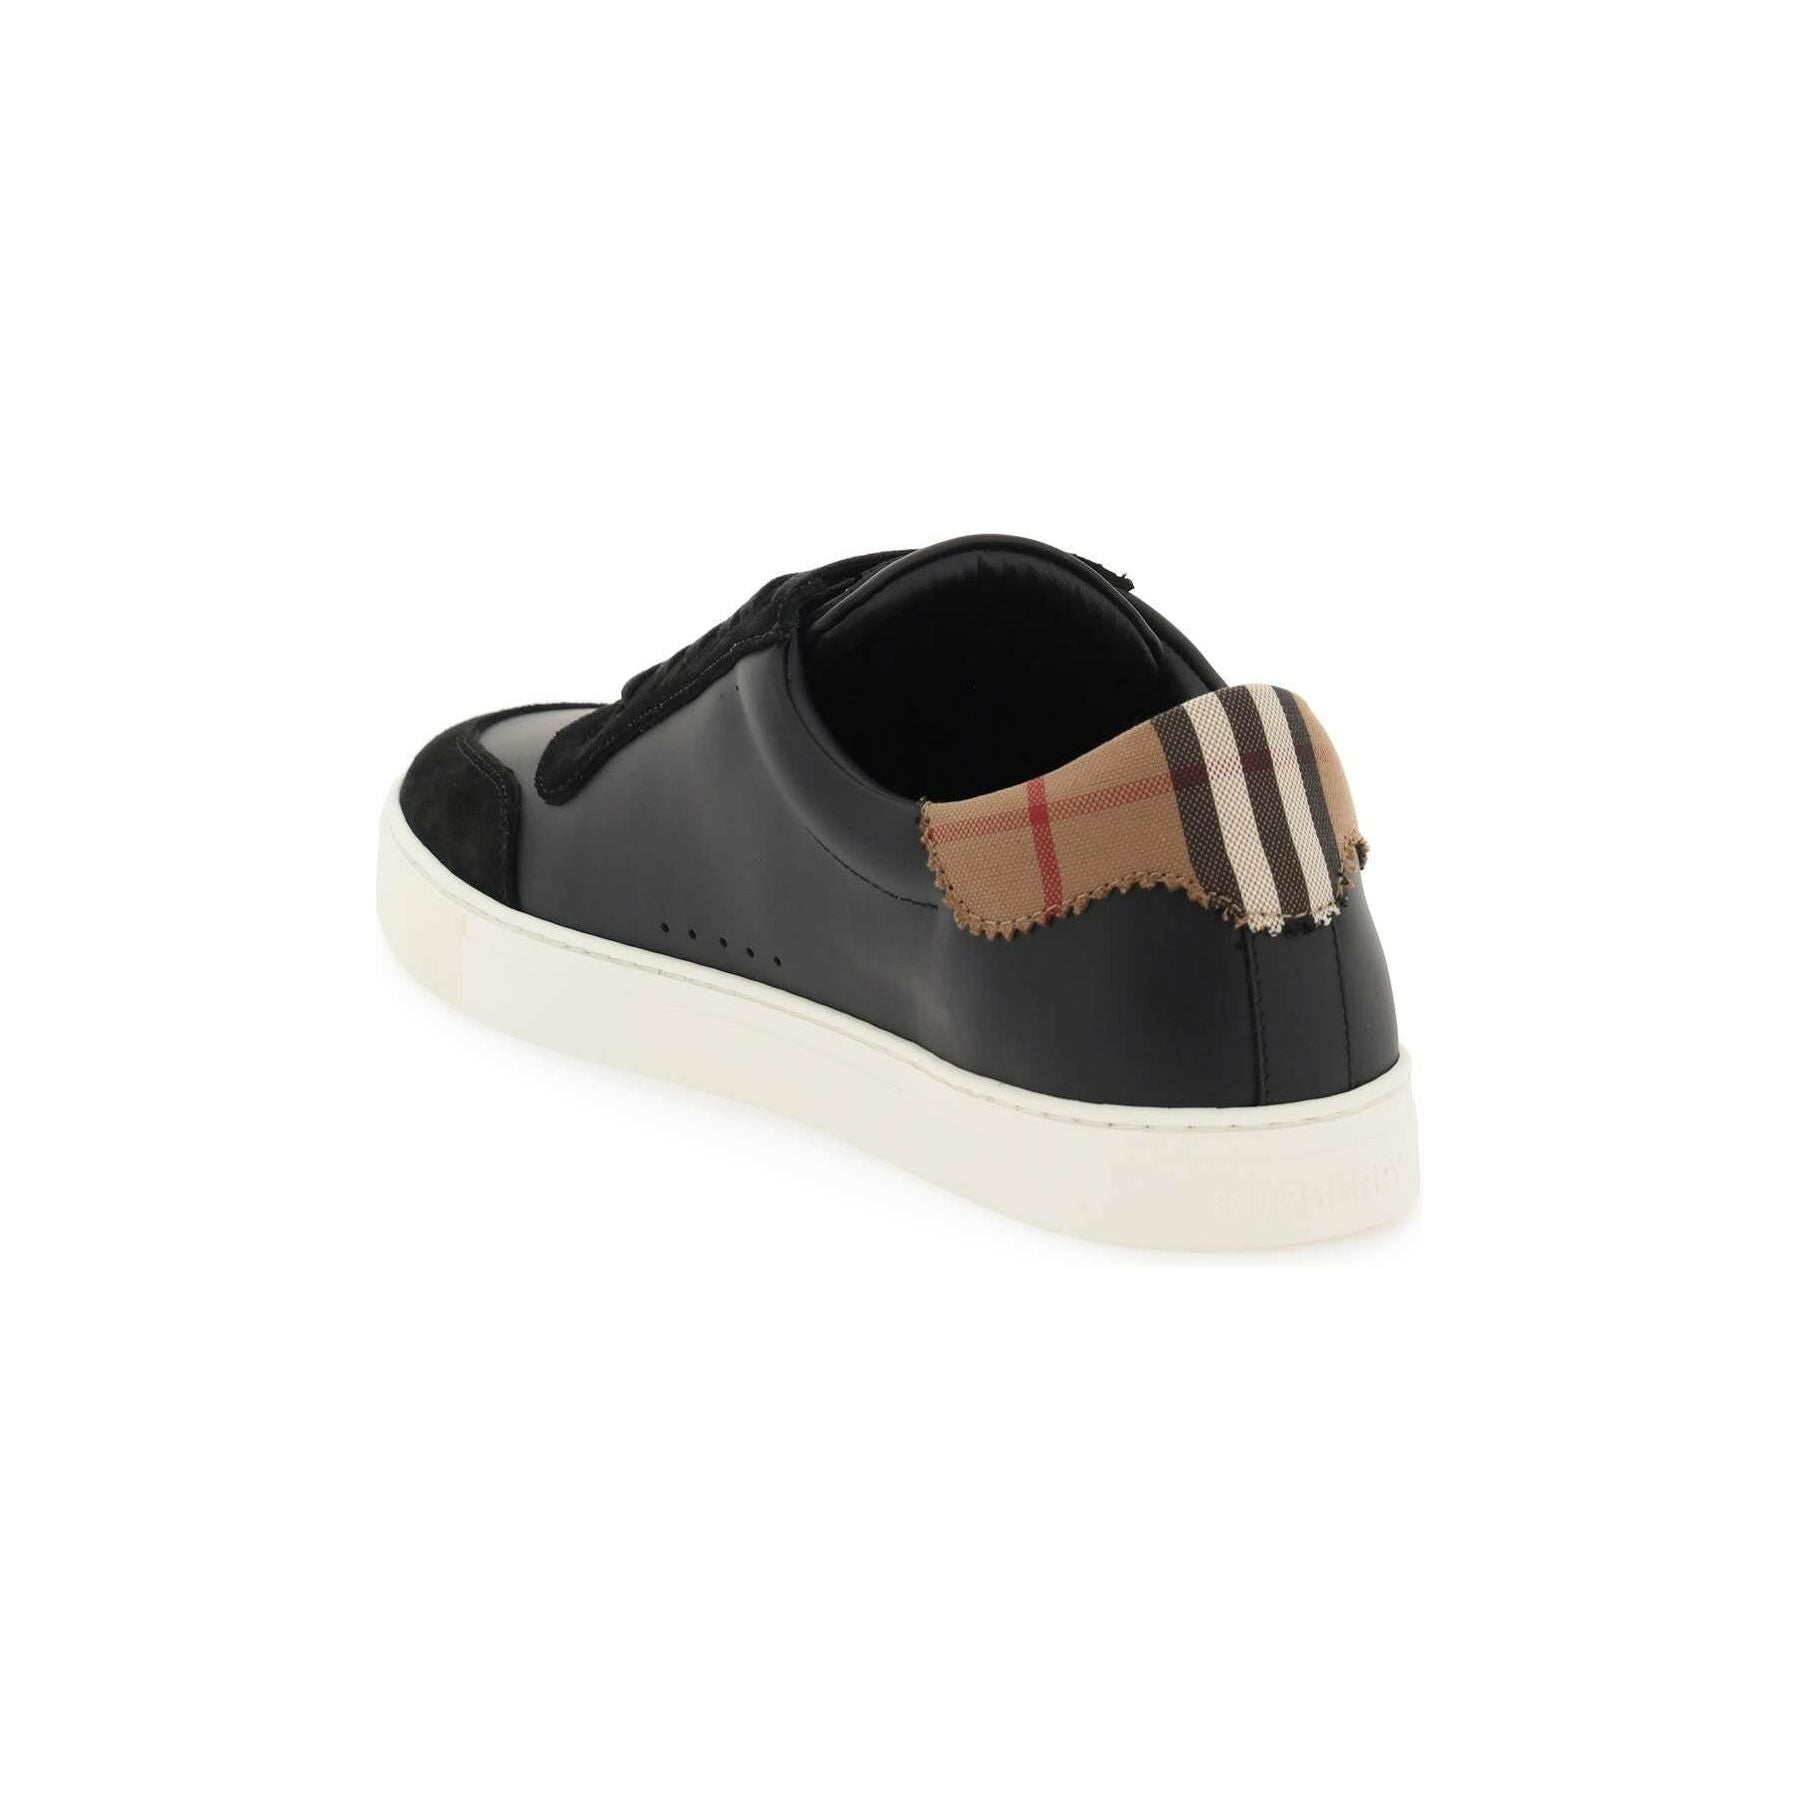 BURBERRY Leather, Suede and Vintage Check Cotton Sneakers JOHN JULIA.